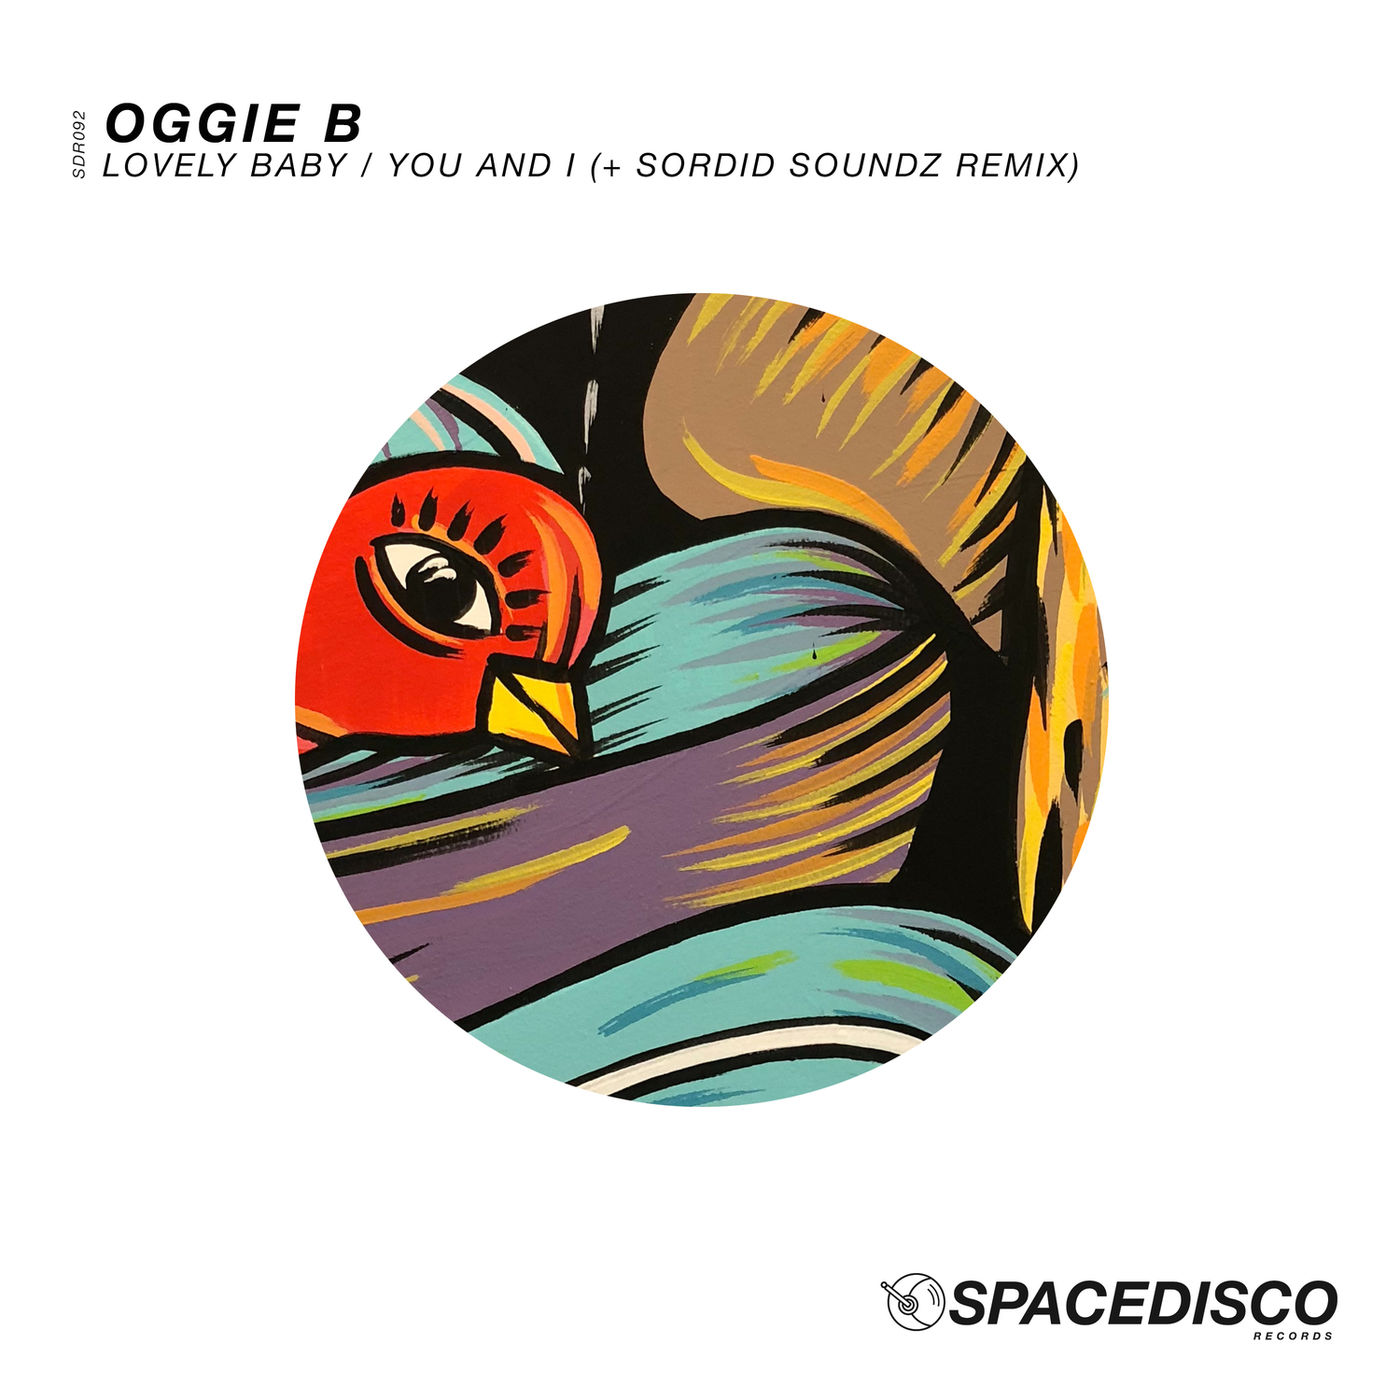 Oggie B - Lovely Baby / You and I / Spacedisco Records